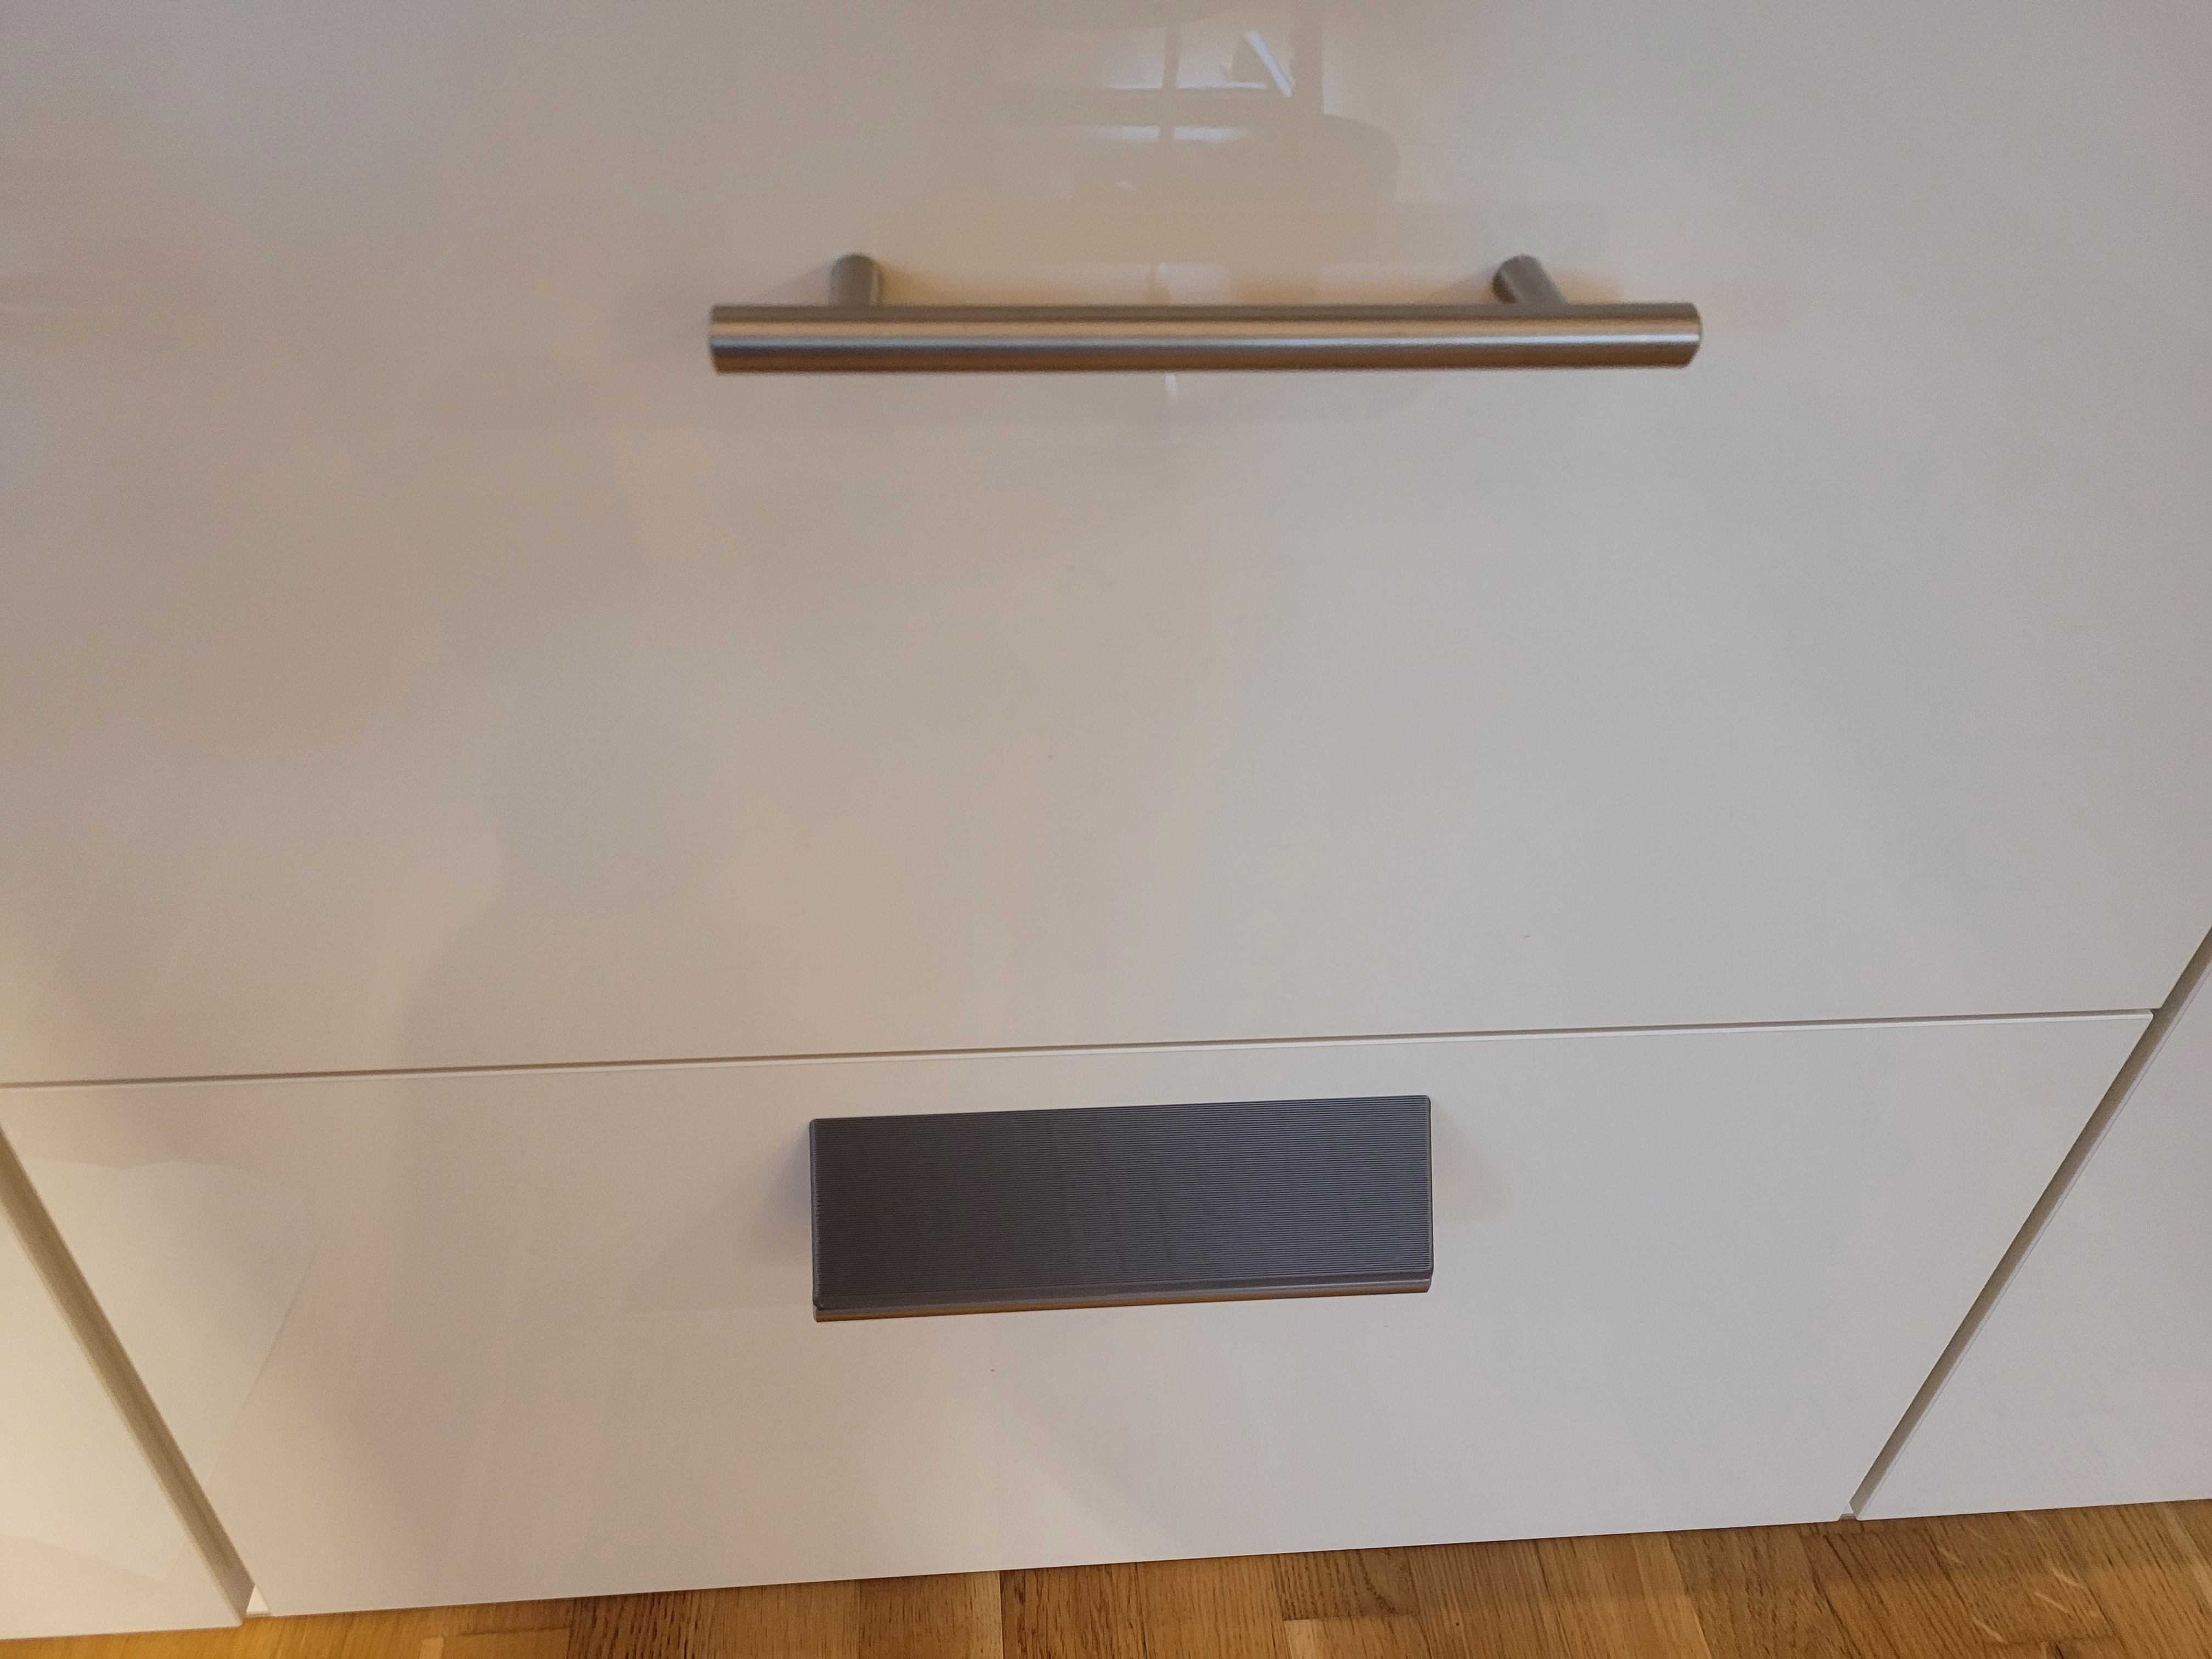 Child proof drawer handles with slopes